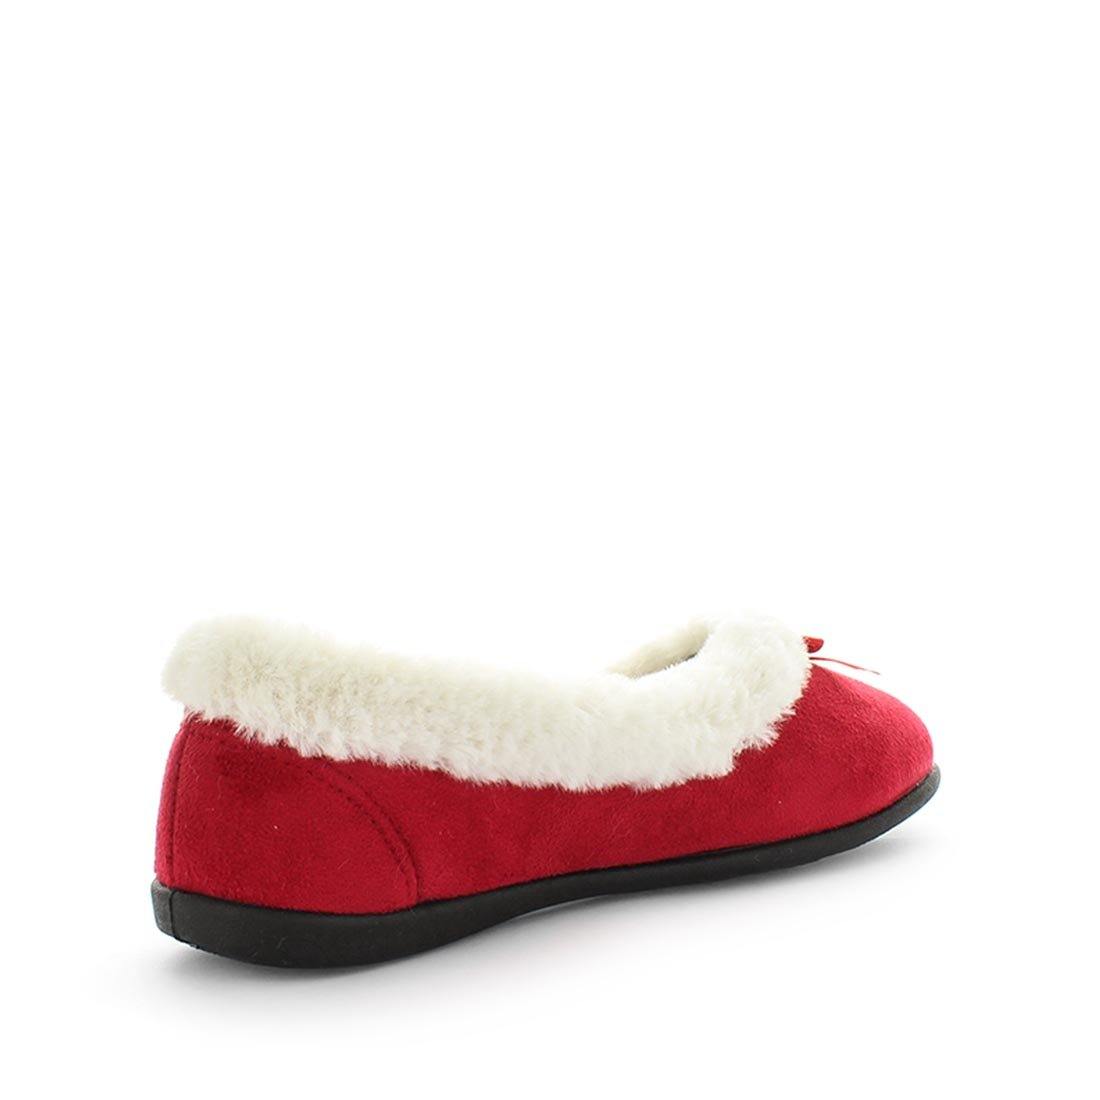 Elmo by panda slippers - womens slippers - memory foam slippers - womens ballet slippers - all year slippers - cute felt ballet slipper by panda slippers with microterry lining, faux fur collar trim and a memory foam sock for extra comfort